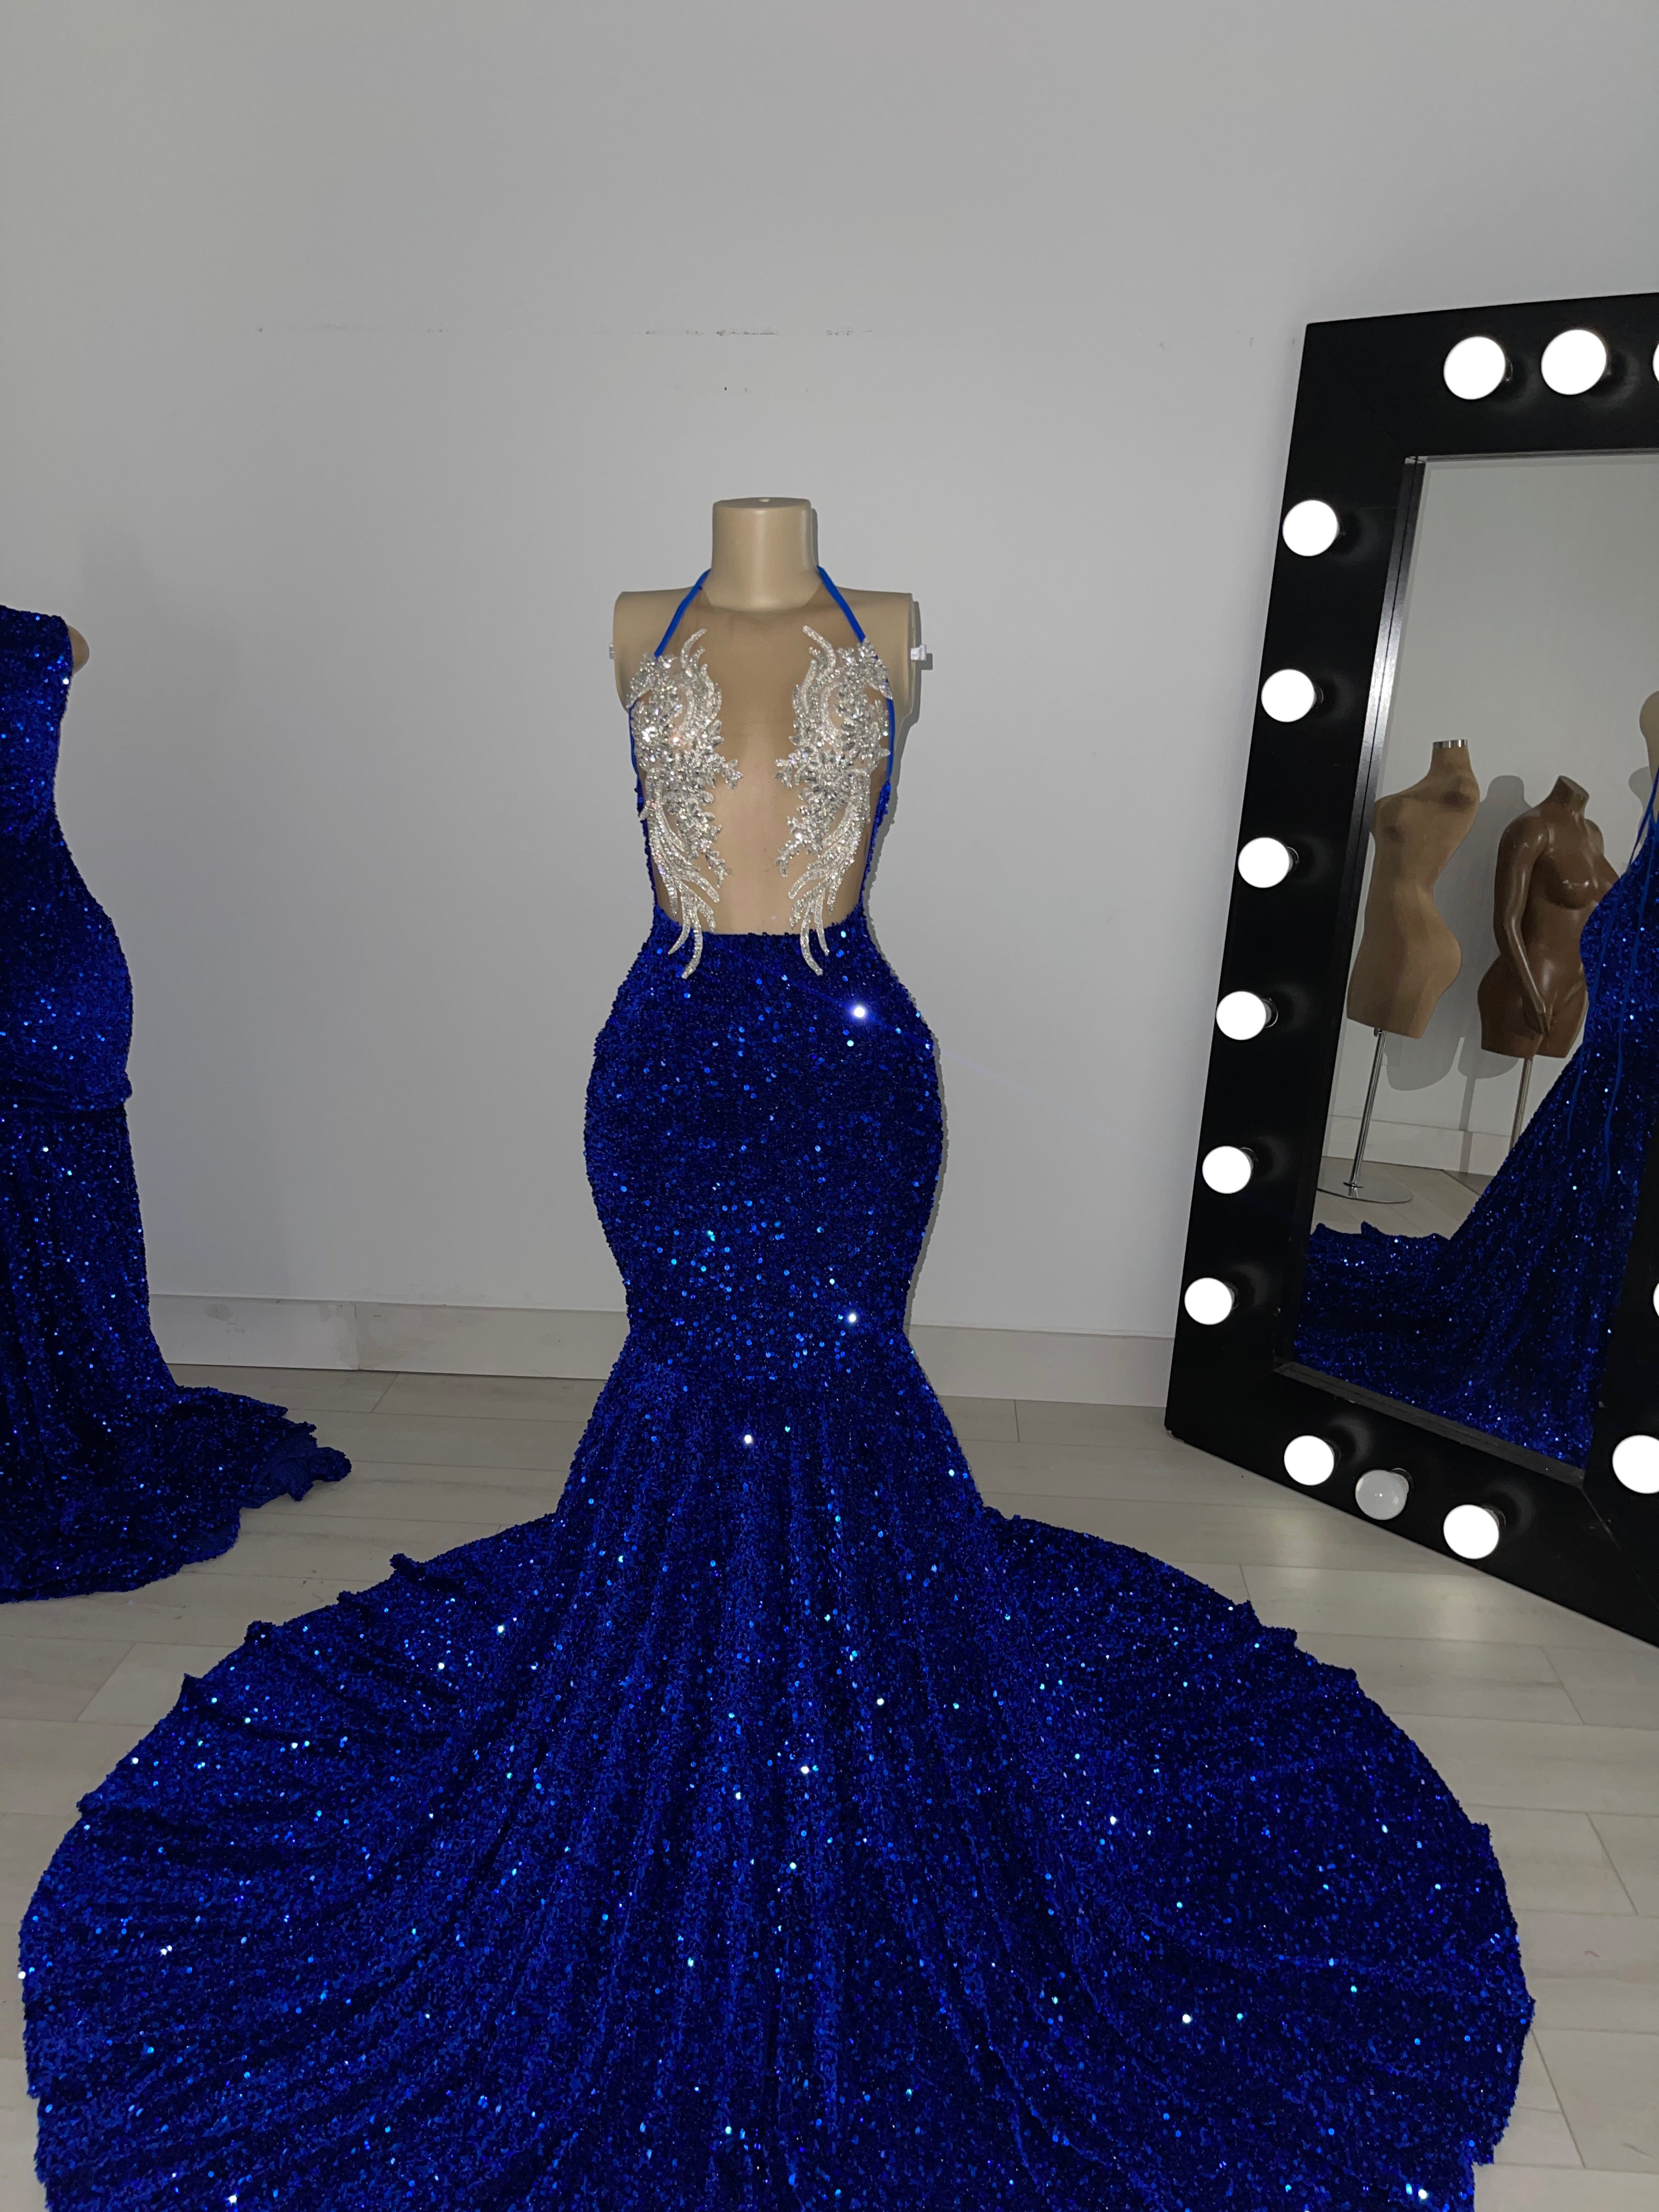 LAILAH Royal Blue Halter Style Sequin Dress with Silver Rhinestones | PREORDER -  SHIP ESTIMATED: 05/07